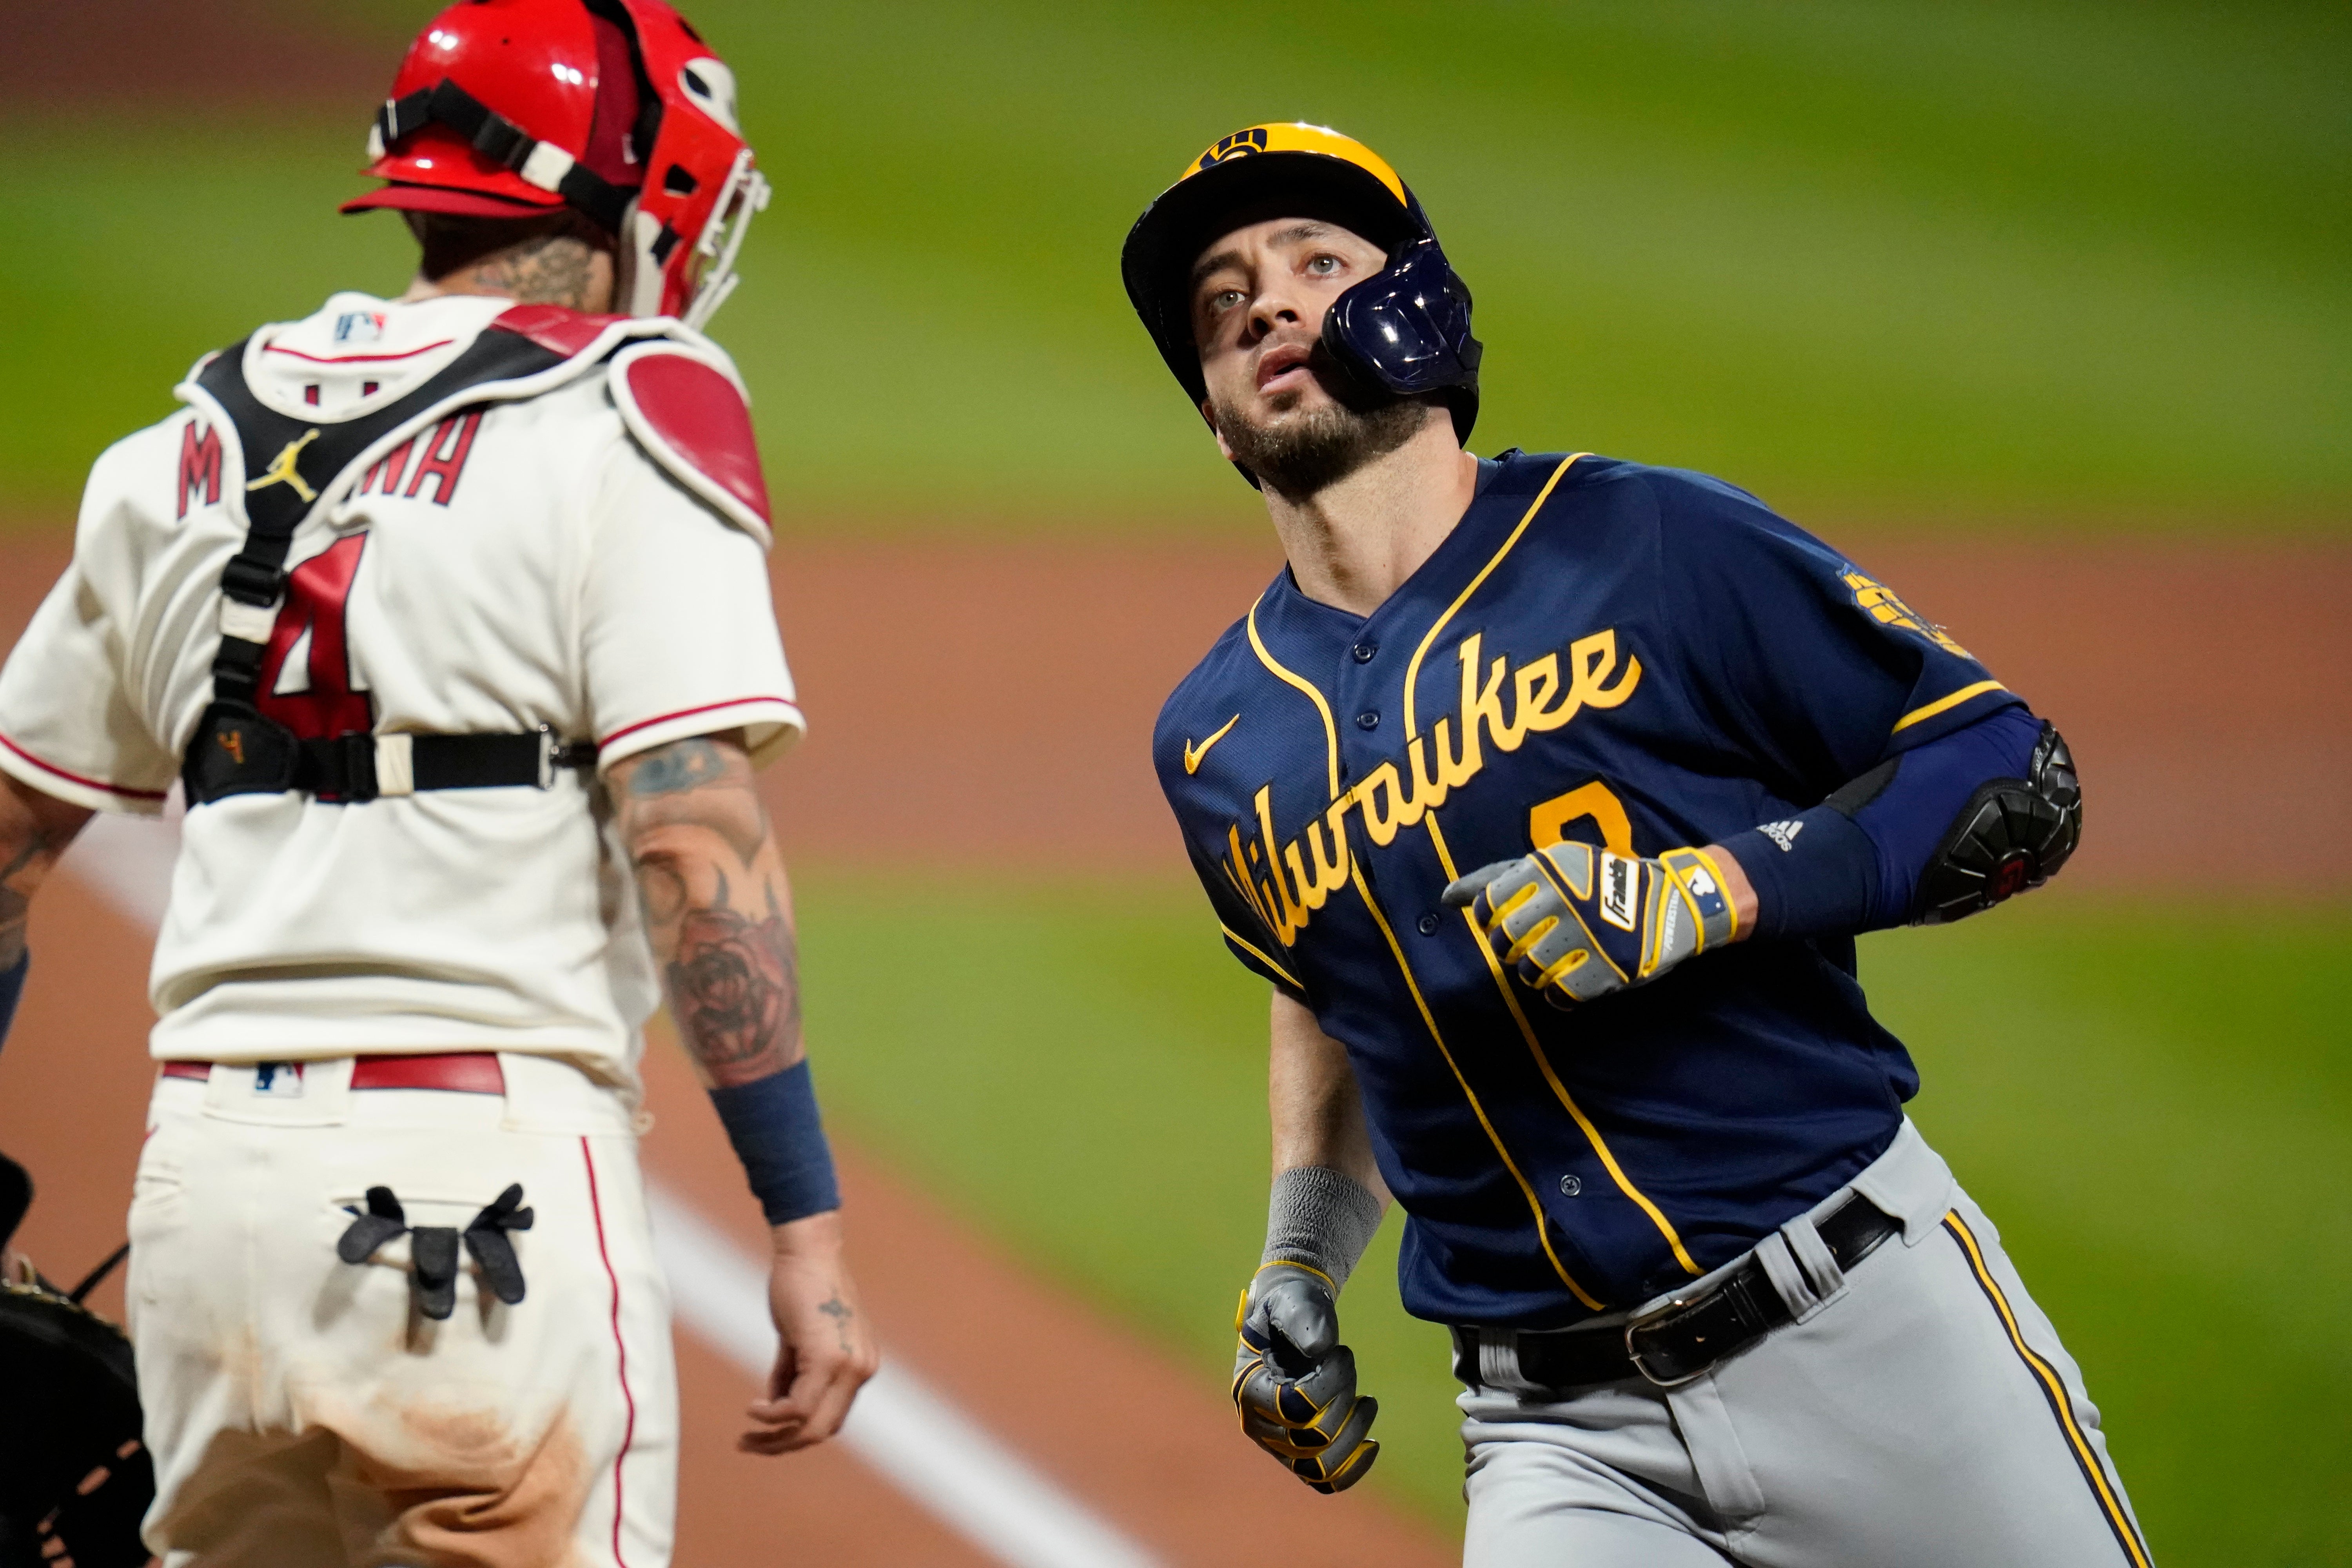 Cardinals-Brewers Game Postponed After St. Louis Records